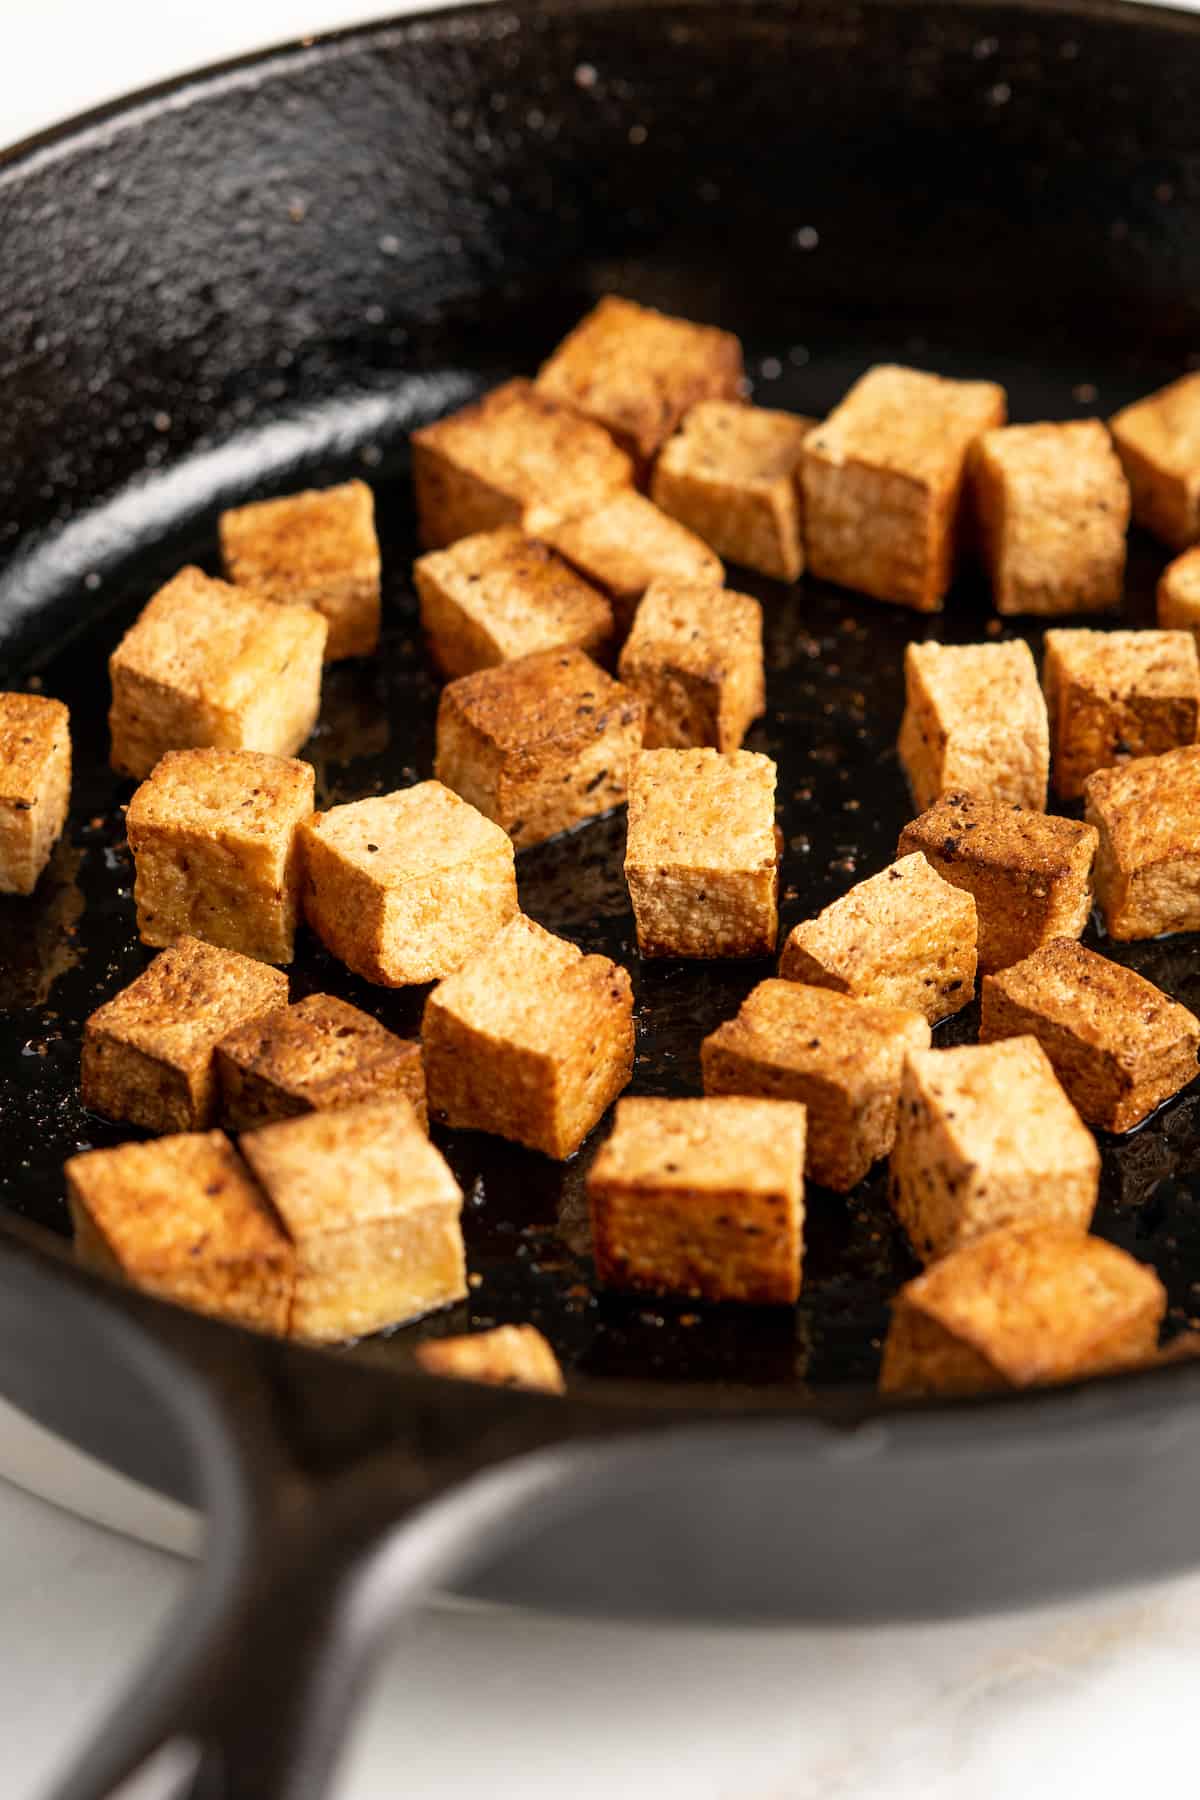 Cooked tofu cubes in cast iron skillet